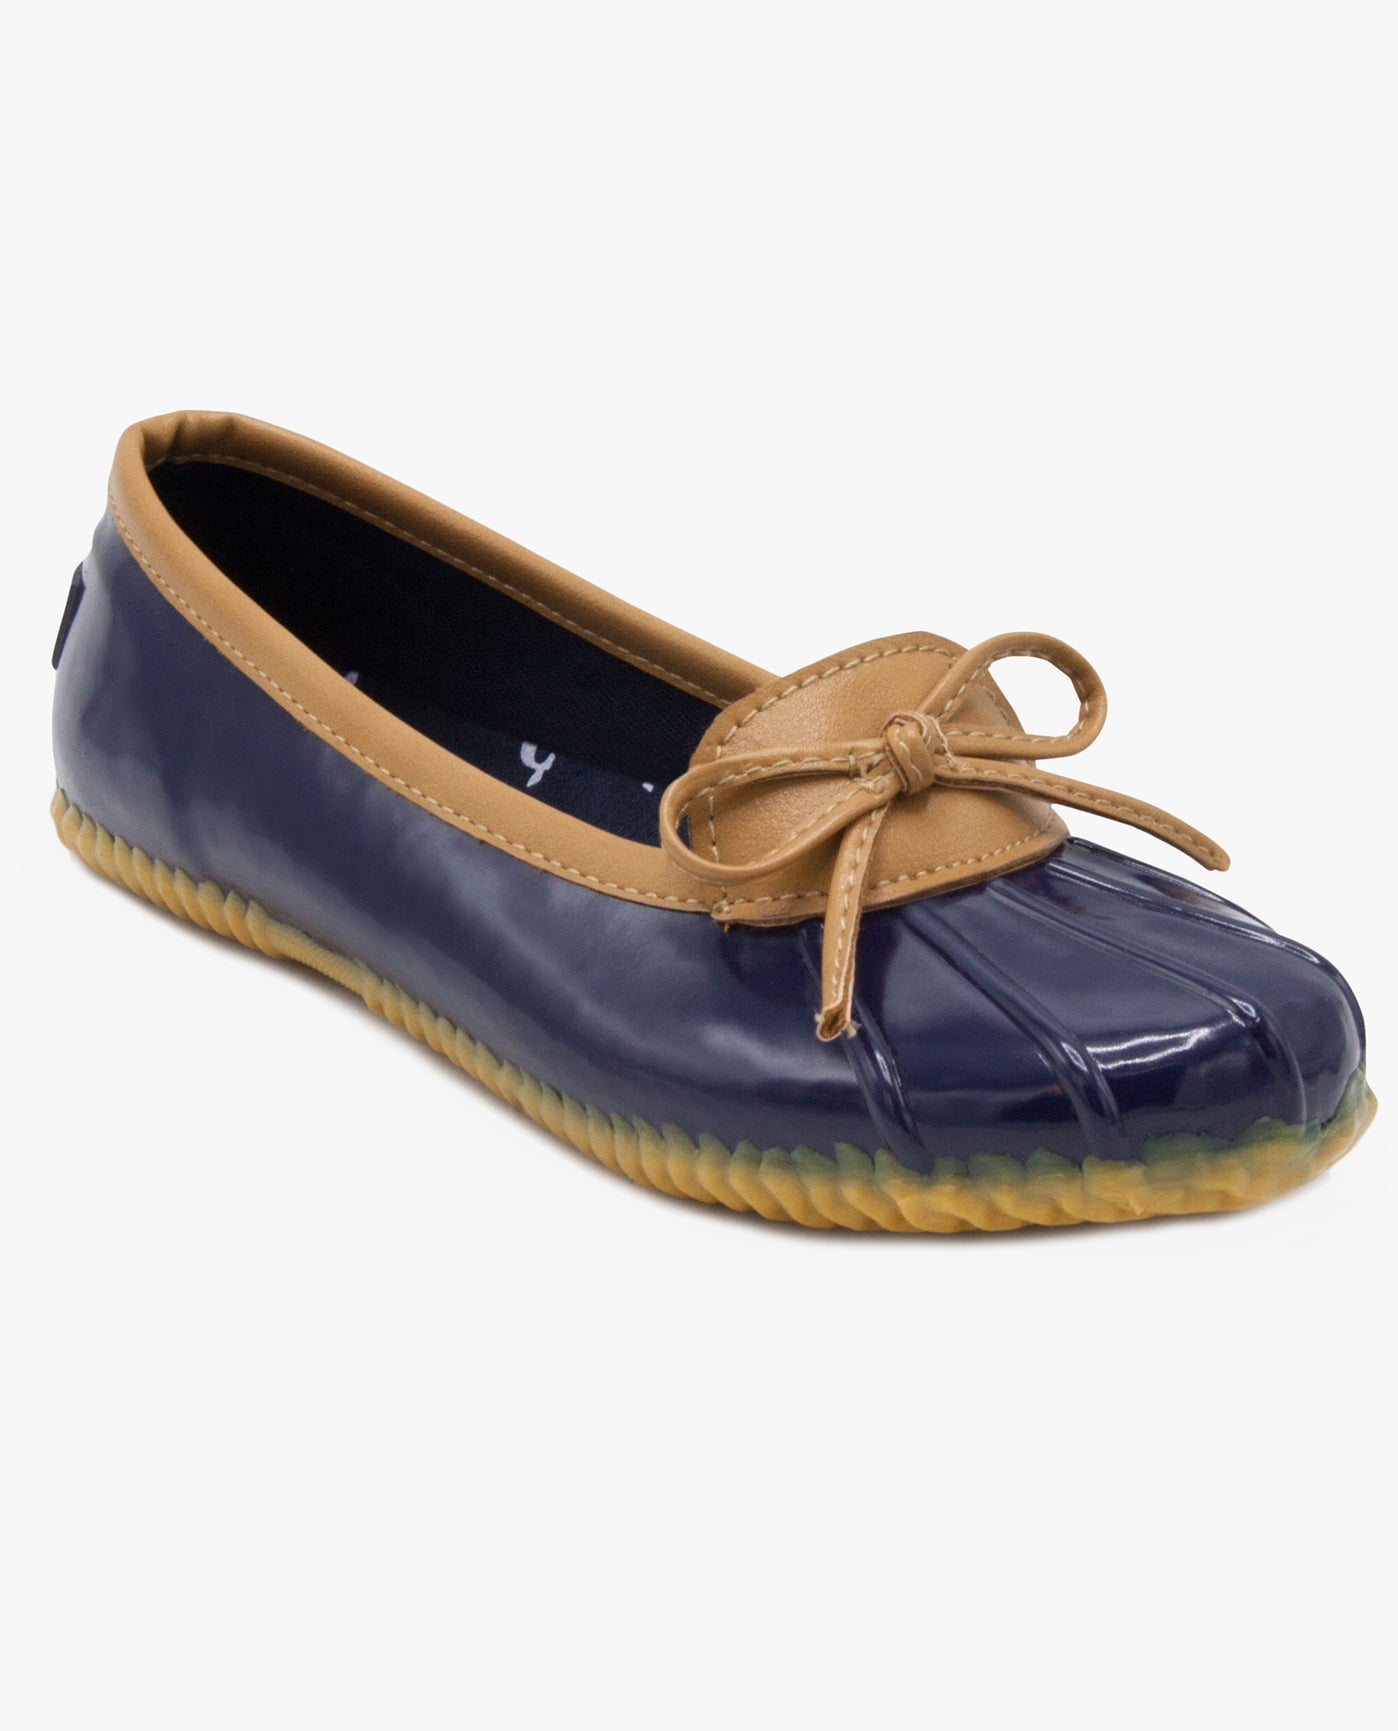 MAIN IMAGE OF WOMENS WEBSTER DUCK SHOE | ESO_NAVY_400